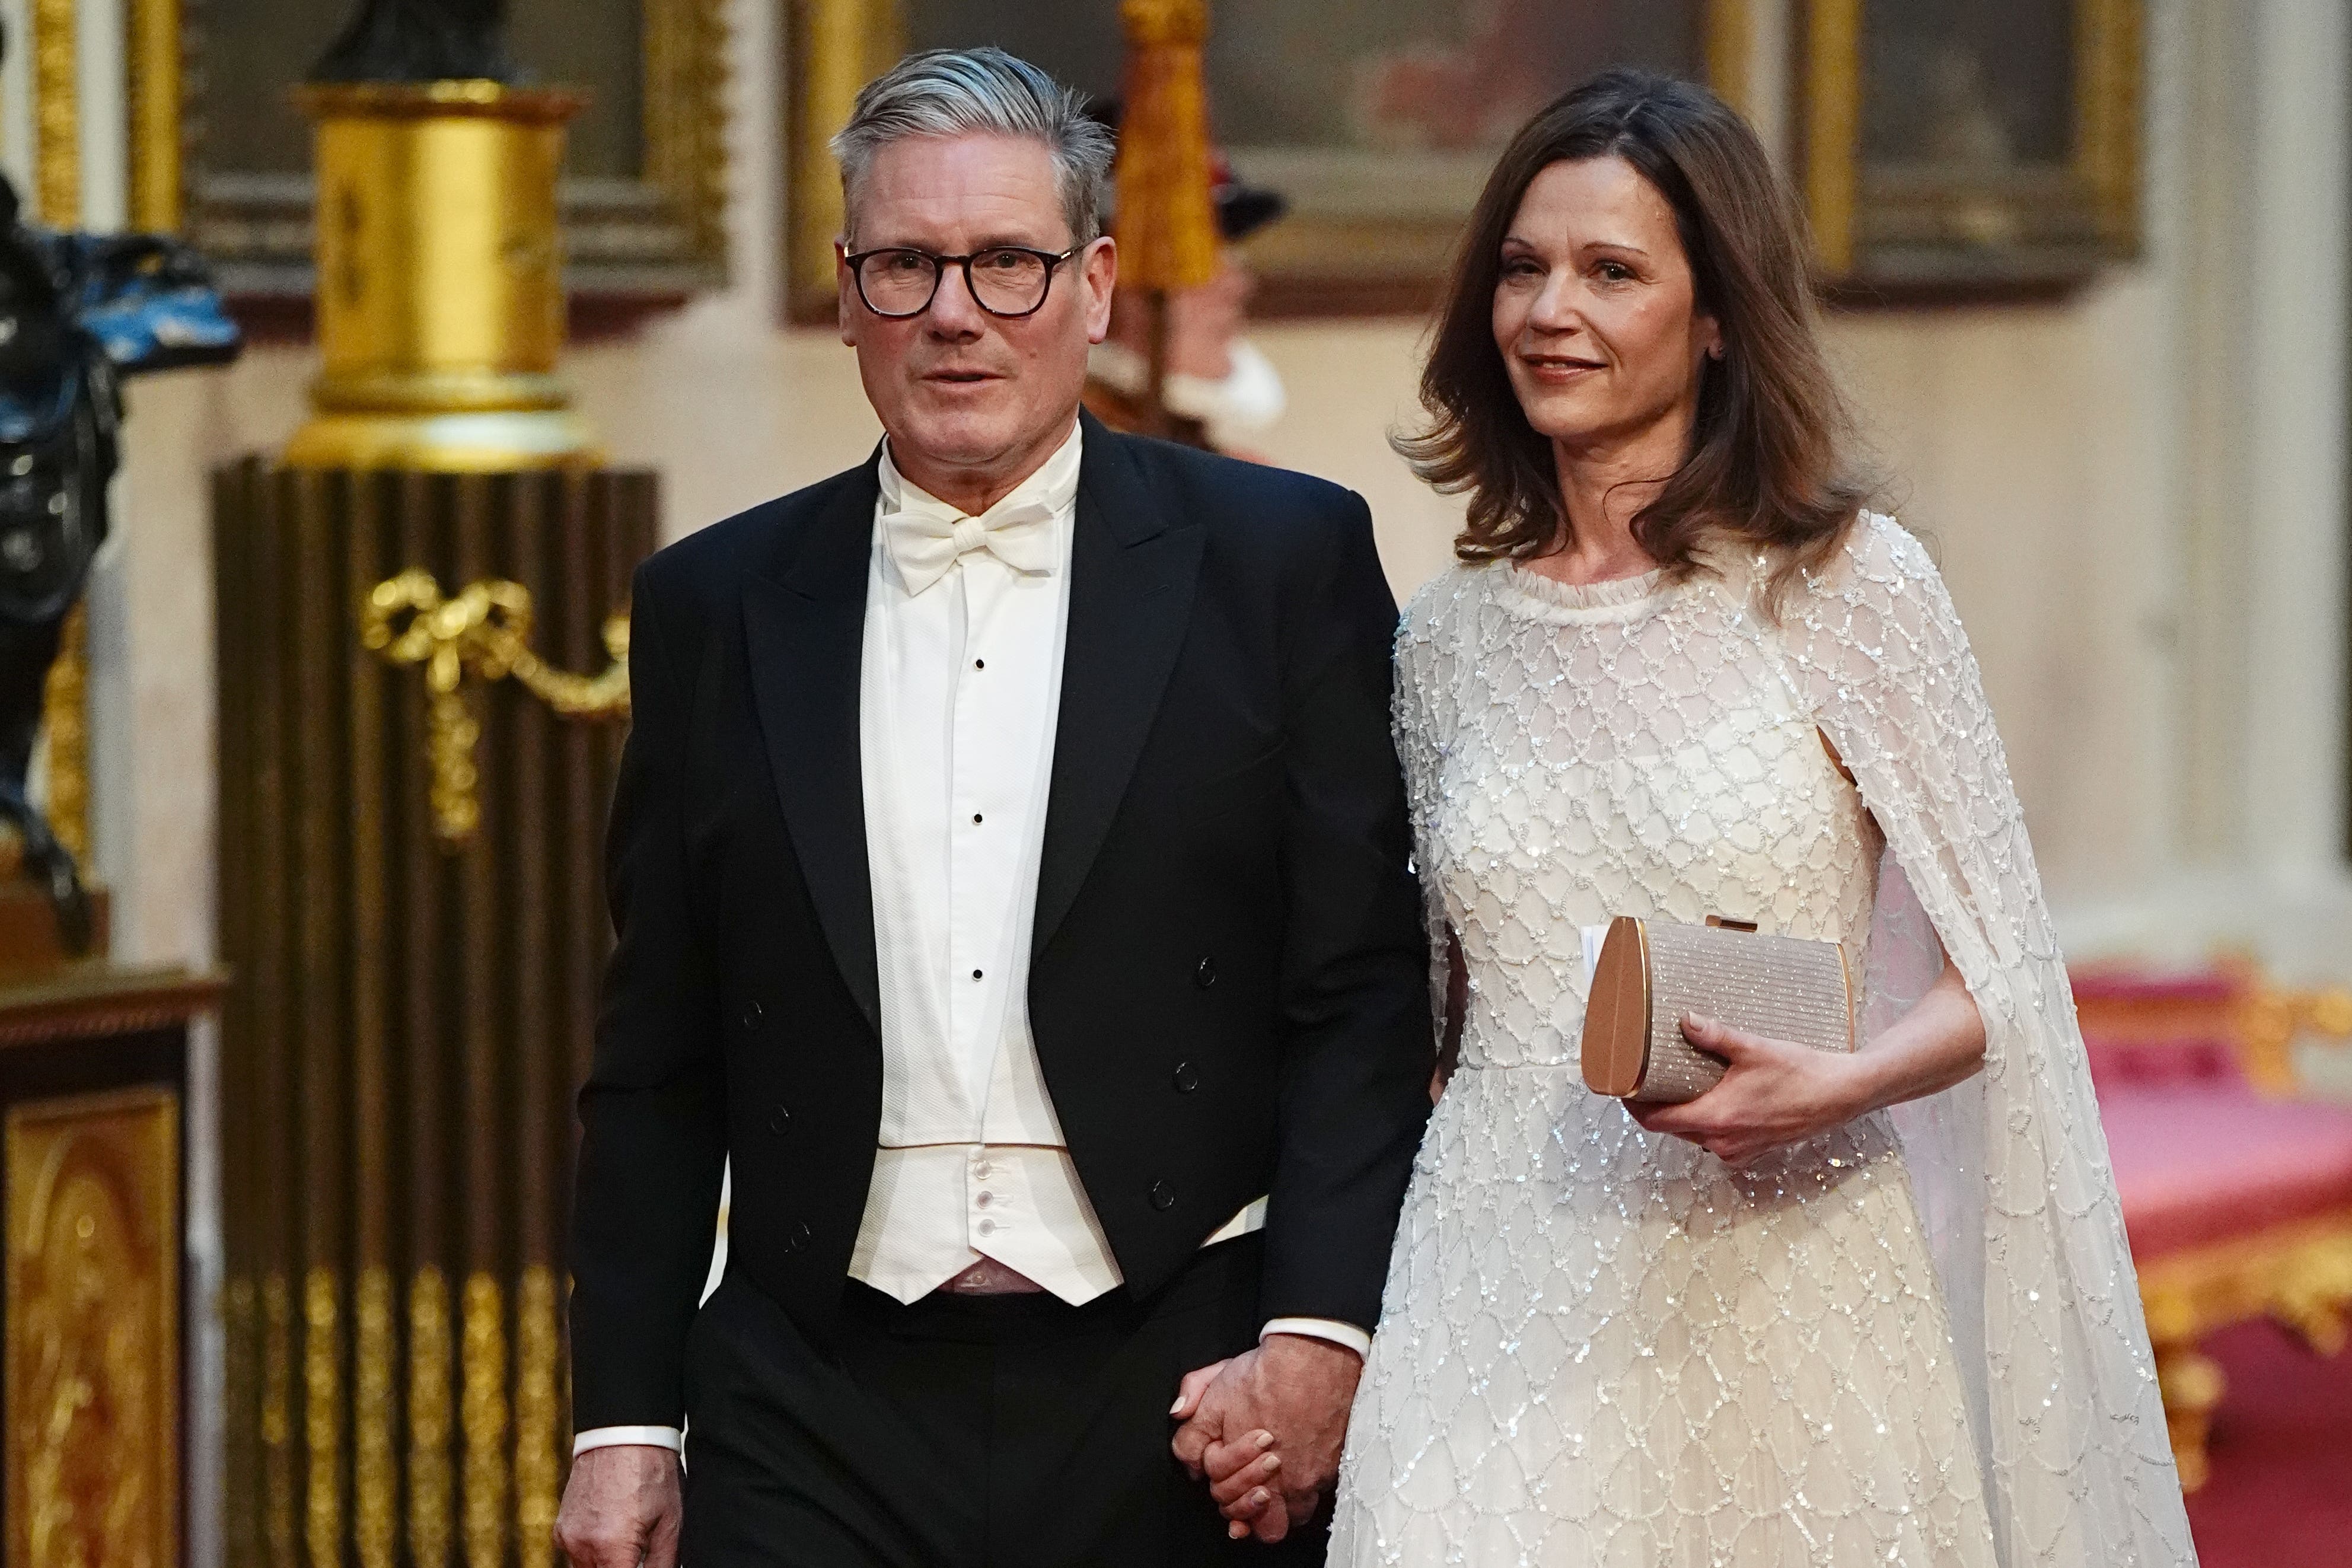 Labour leader Sir Keir Starmer and his wife Victoria make their way along the East Gallery to attend the state banquet for Emperor Naruhito and his wife Empress Masako of Japan at Buckingham Palace (Aaron Chown/PA)